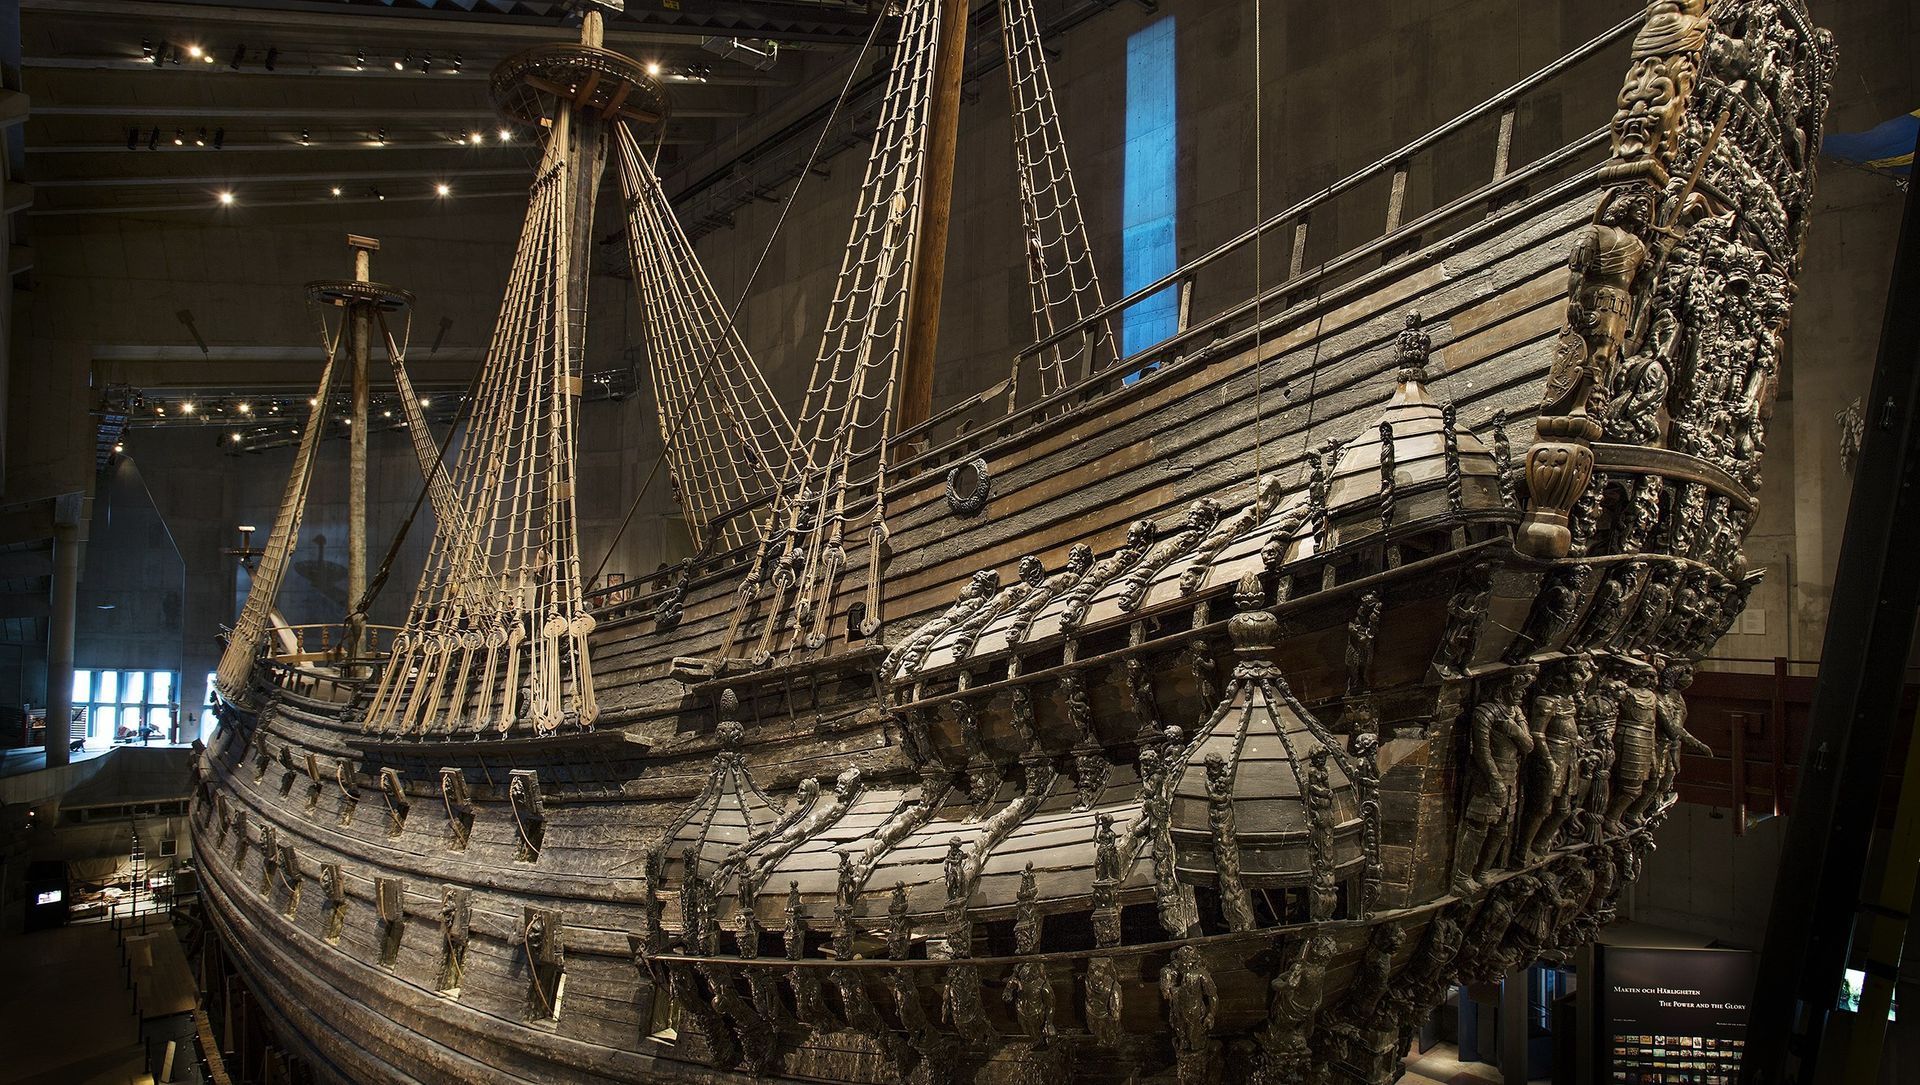 a large ship is on display in a museum .